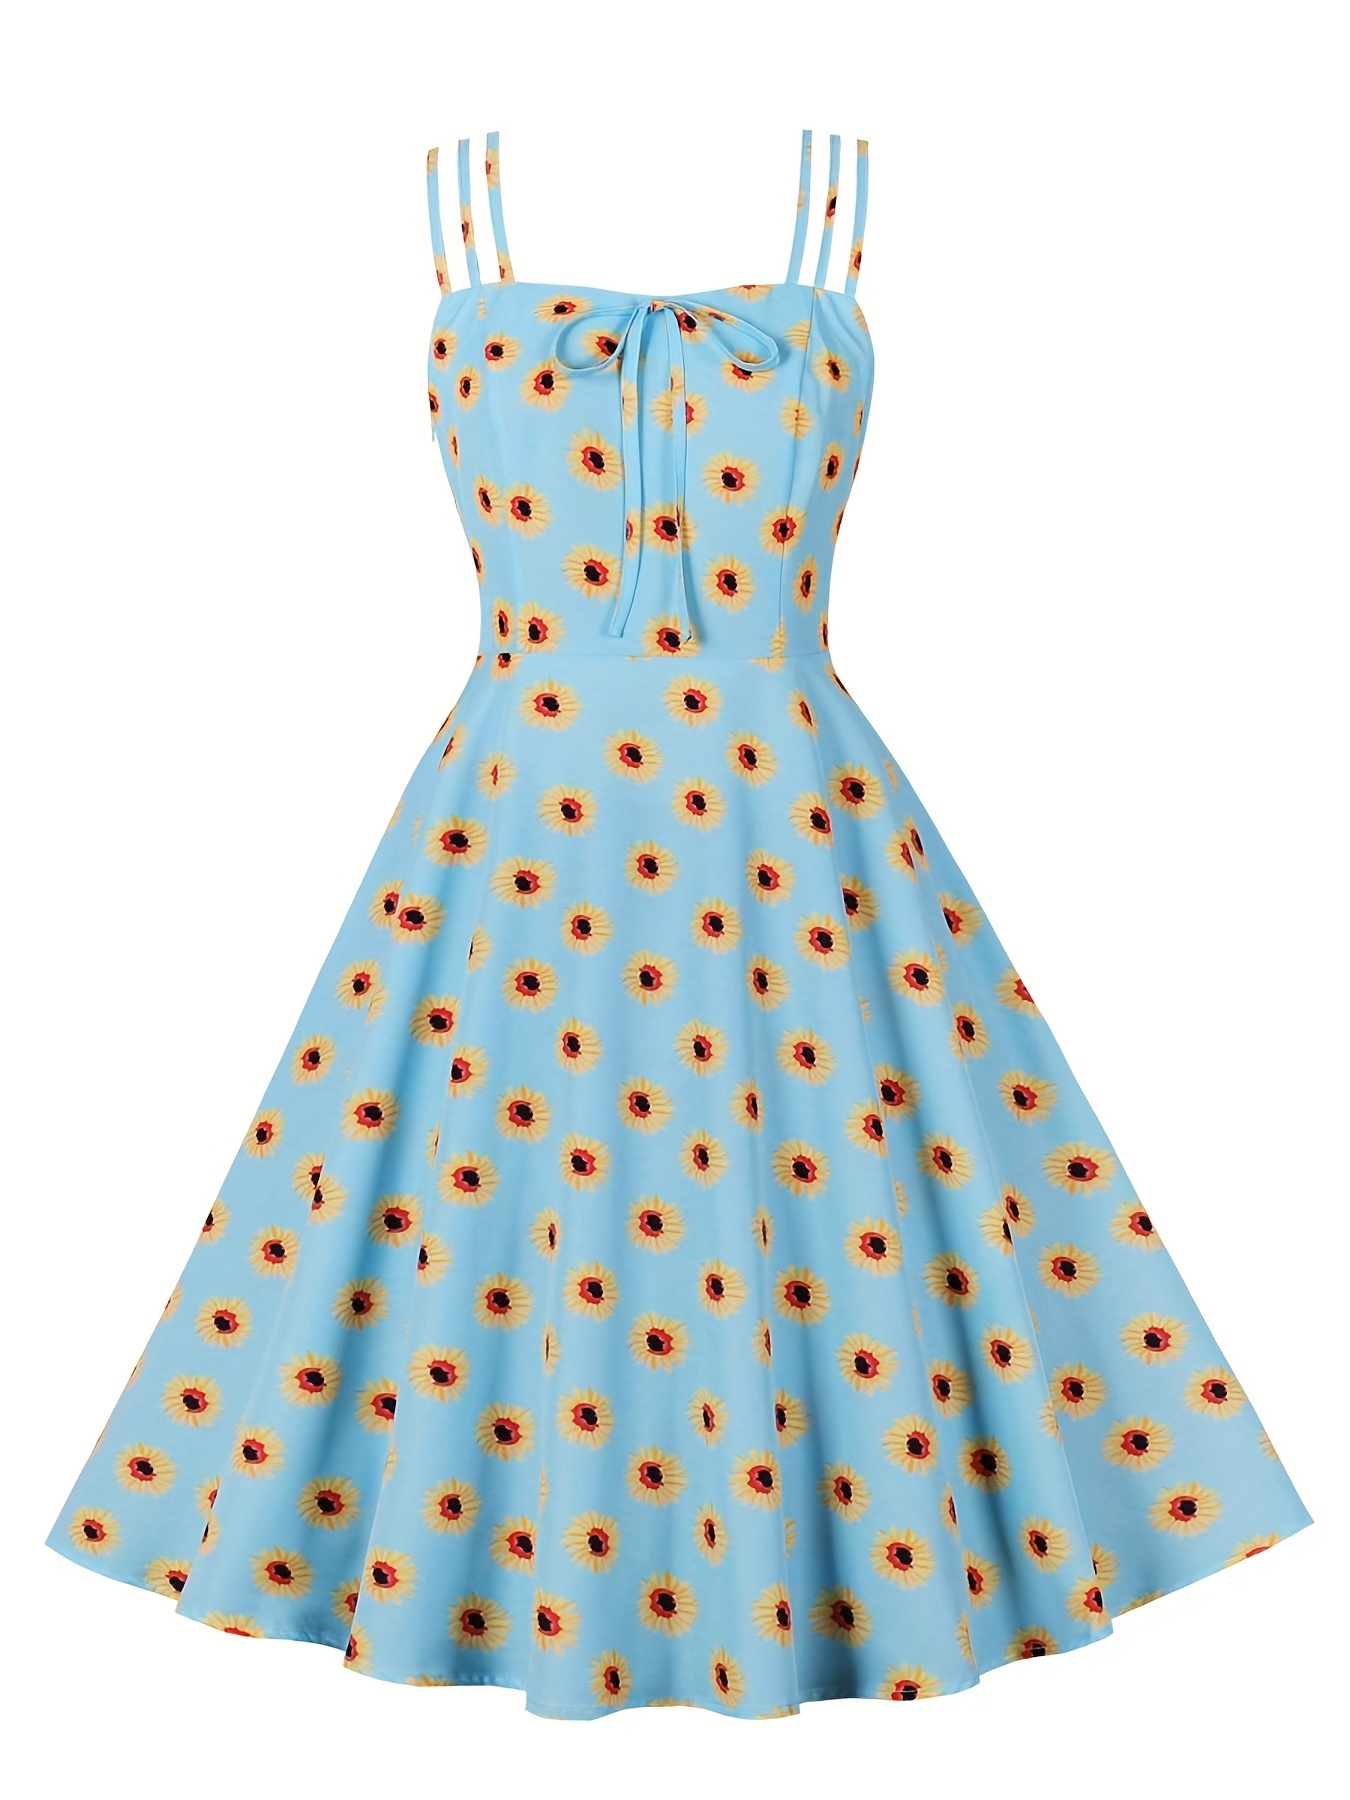 Rockabilly Vintage Yellow Dress for Women 1950s Tea Party Cocktail